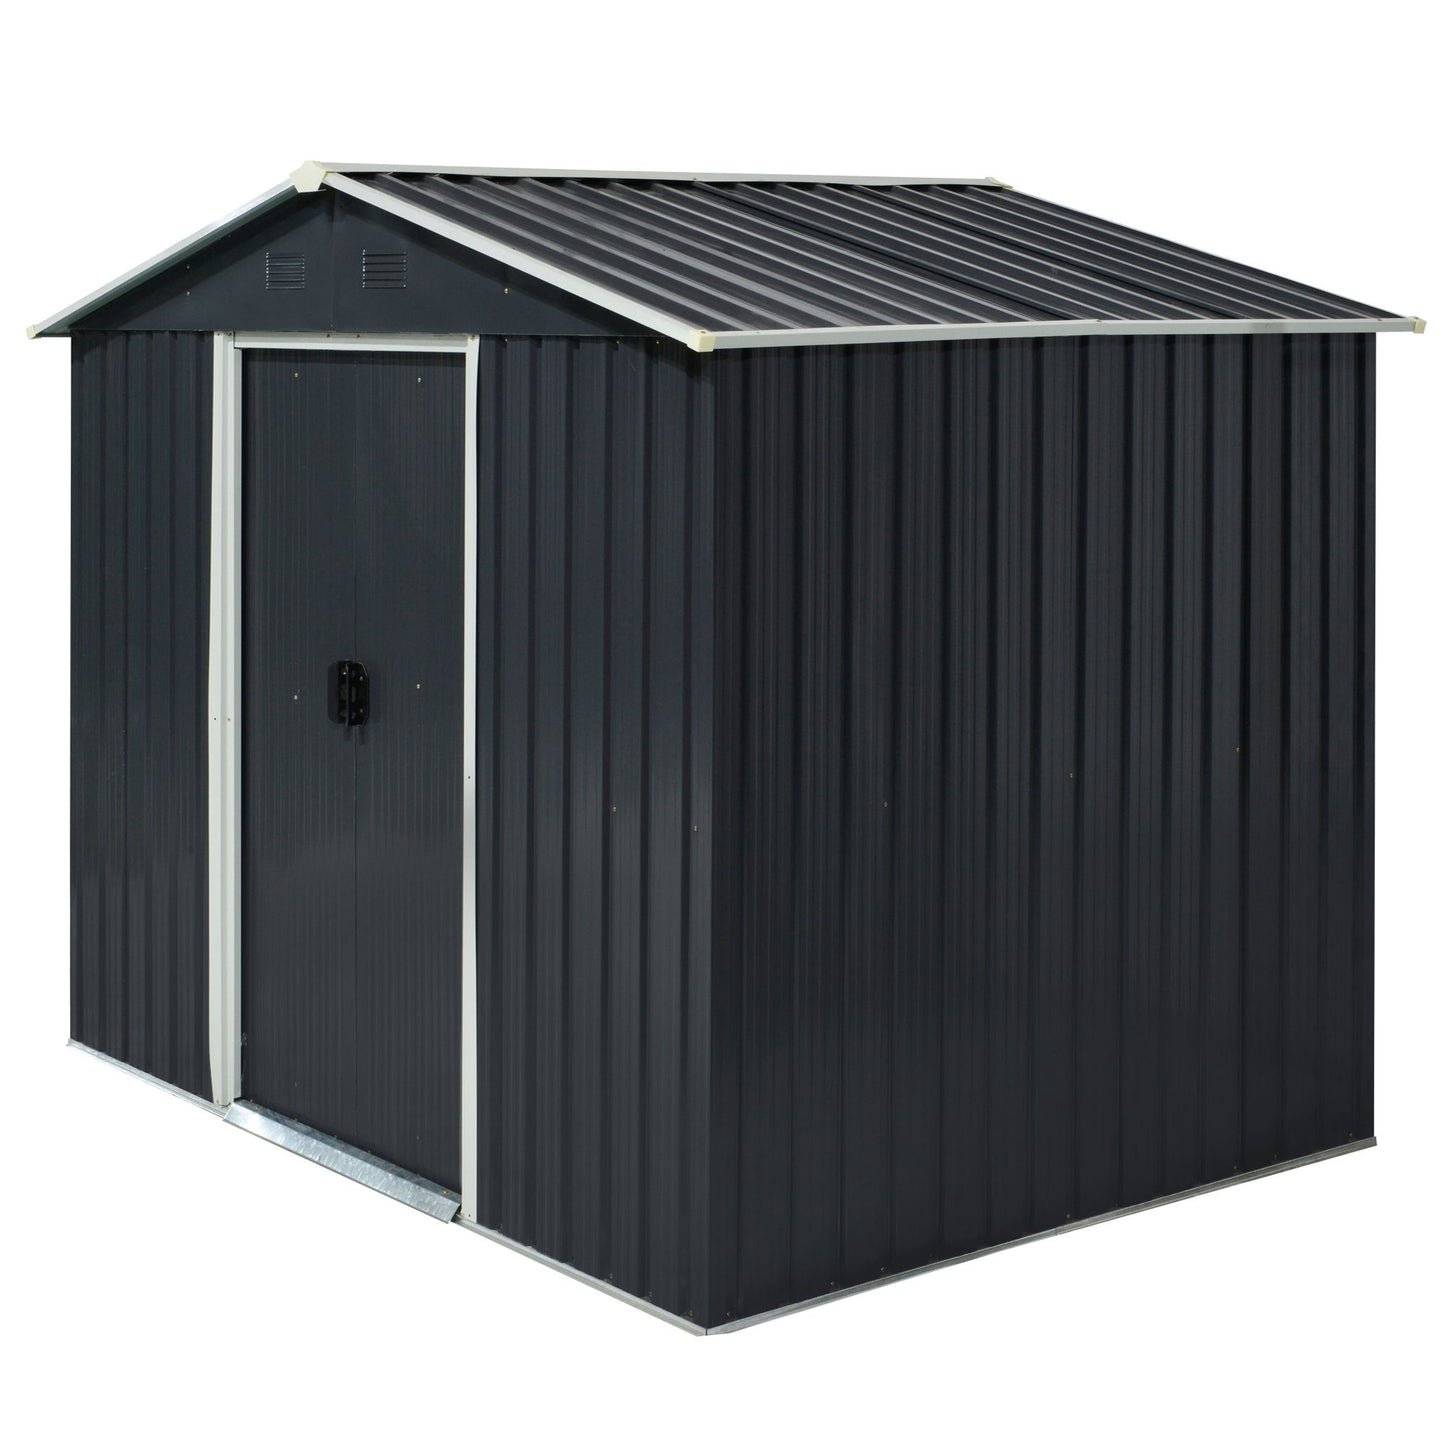 Outsunny 5.7 x 7.7ft Corrugated Steel Sliding Door Garden Shed - Grey